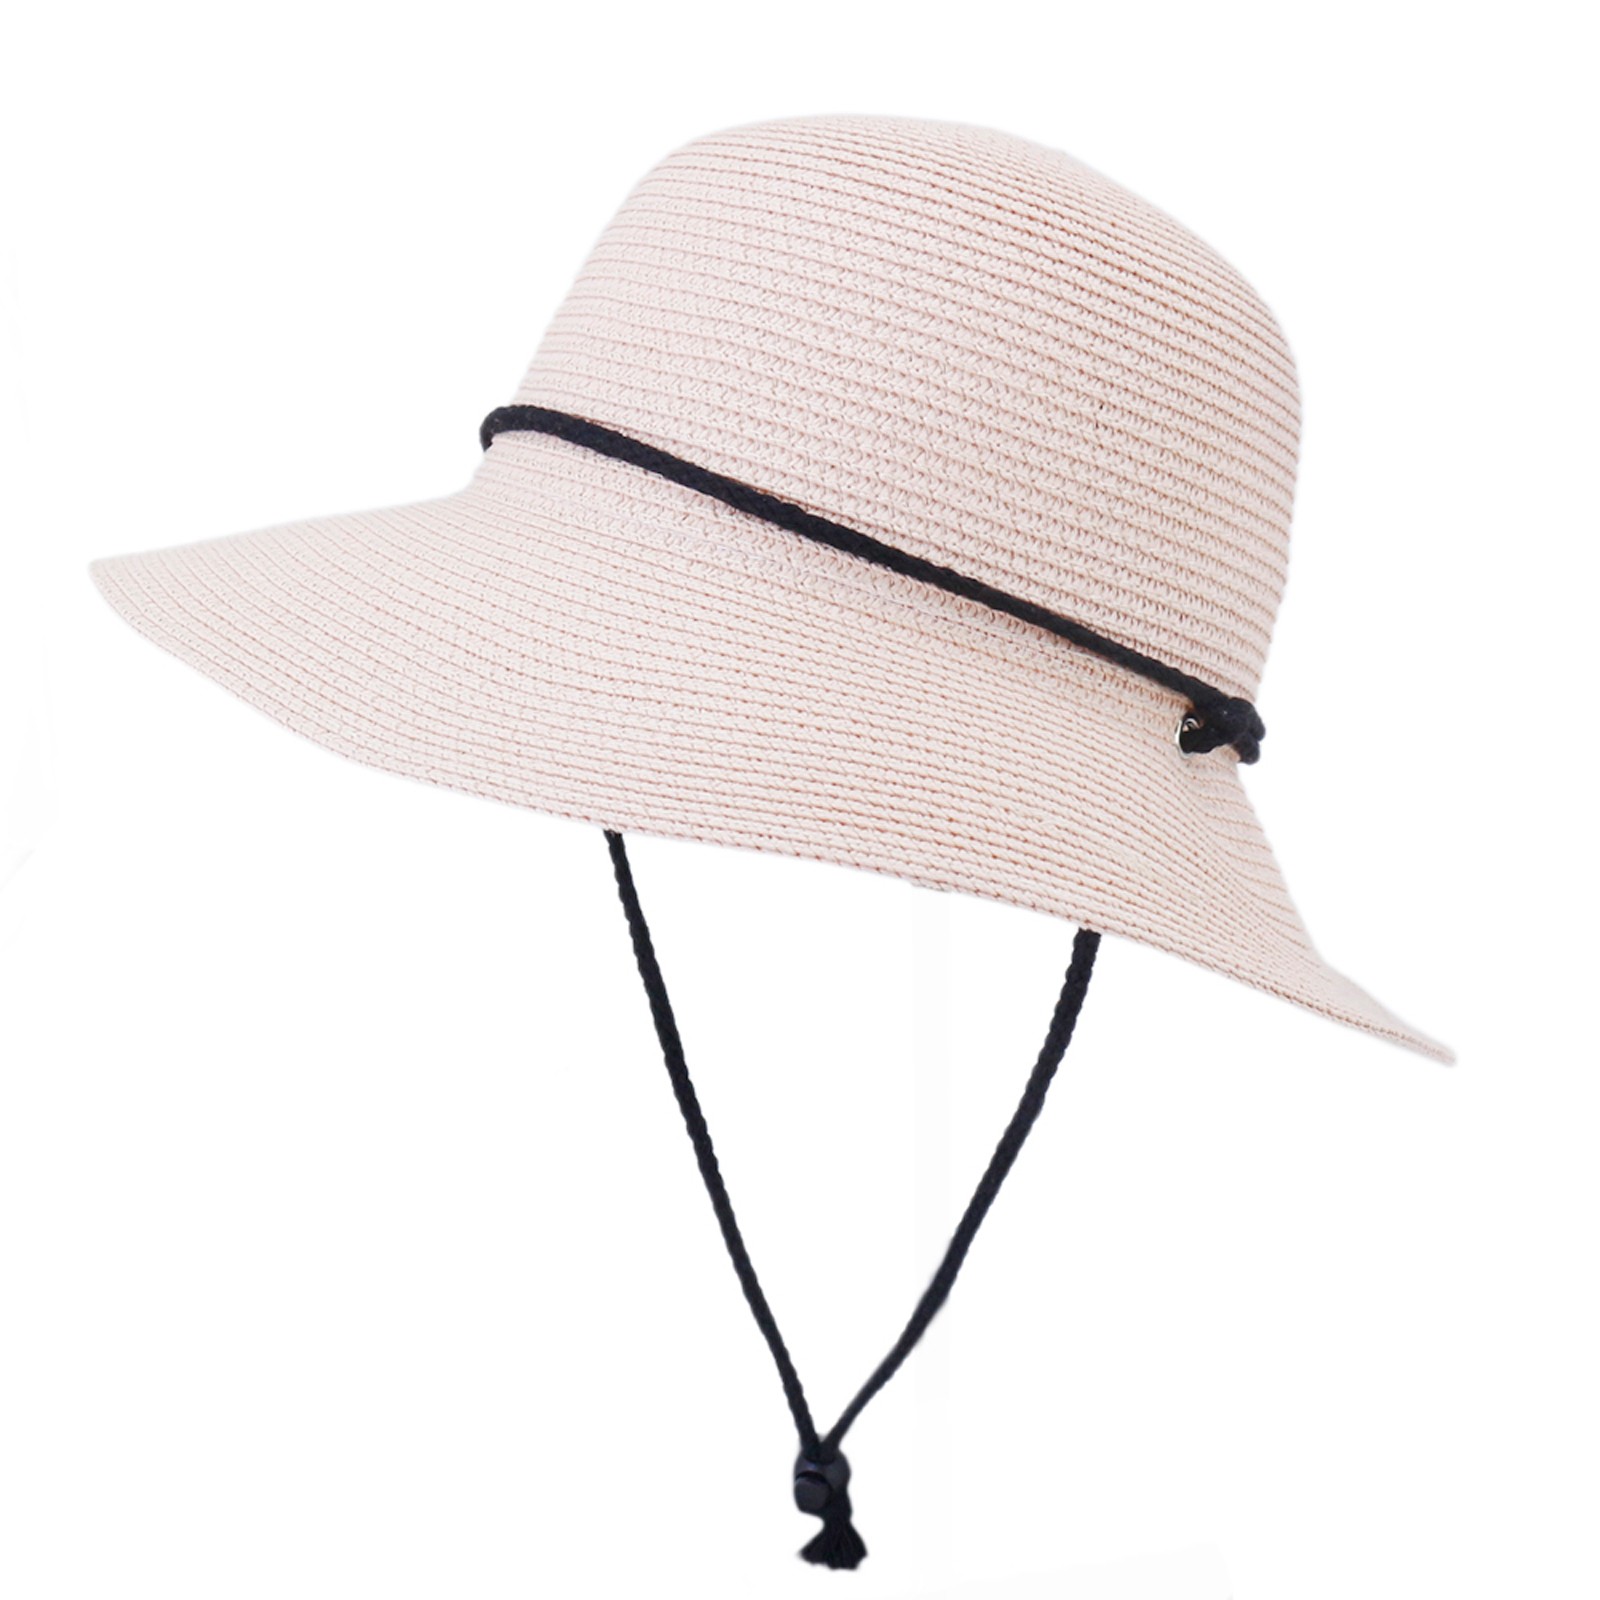 Men's And Women's Beach Hat Fisherman Hat Sun Protection Shade Cover ...